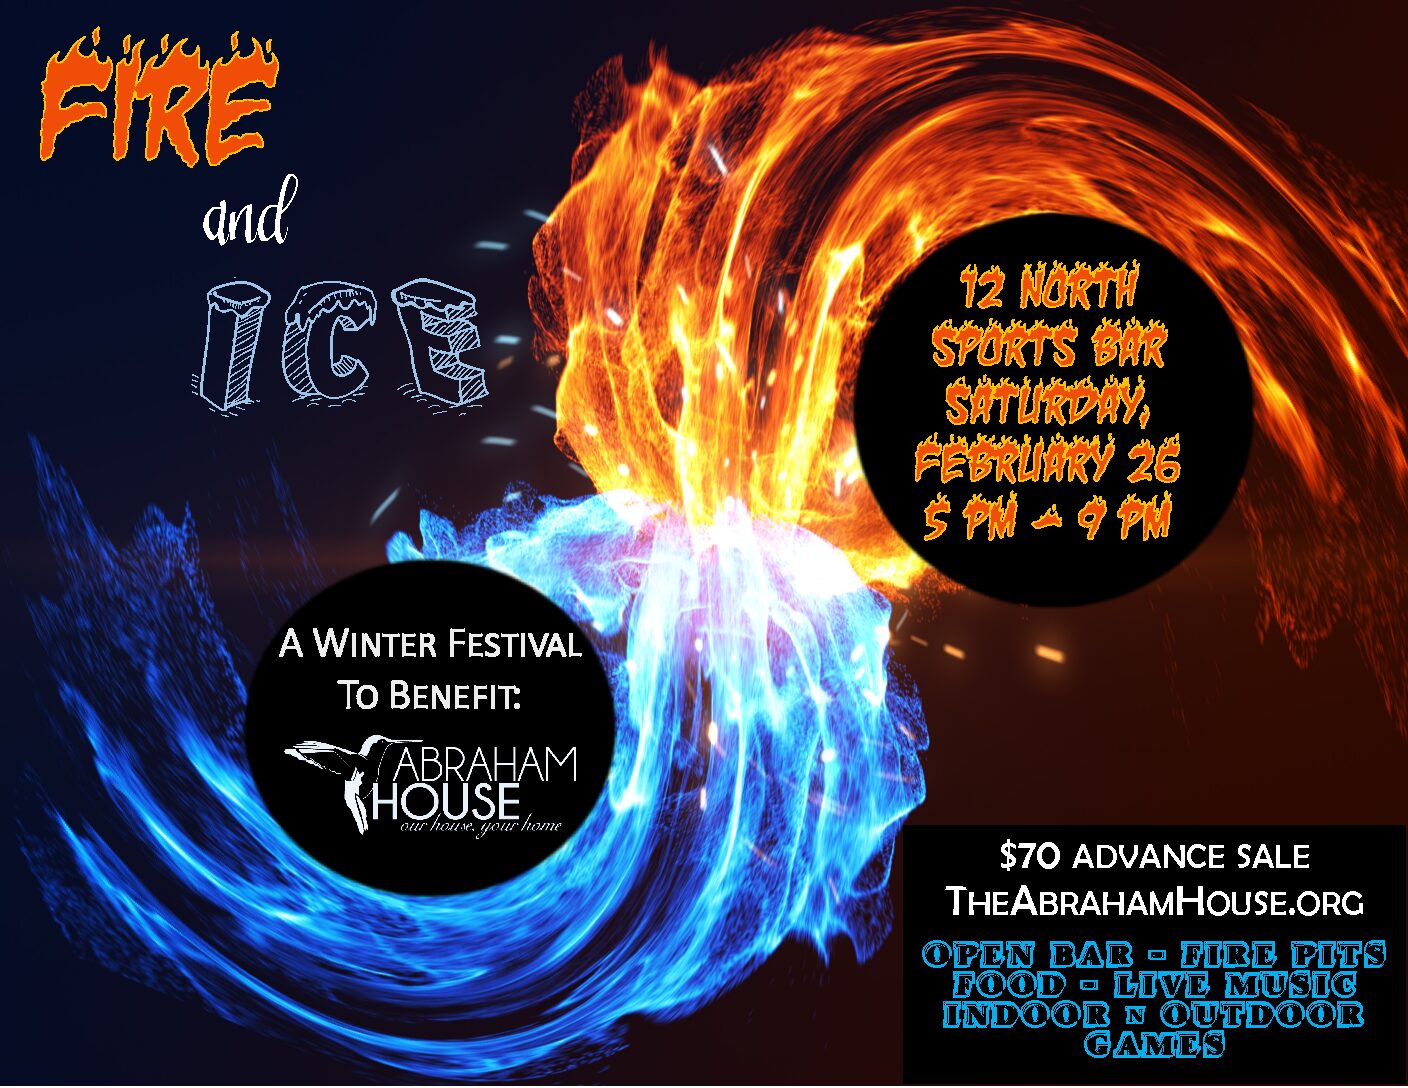 Fire and Ice event to benefit Abraham House